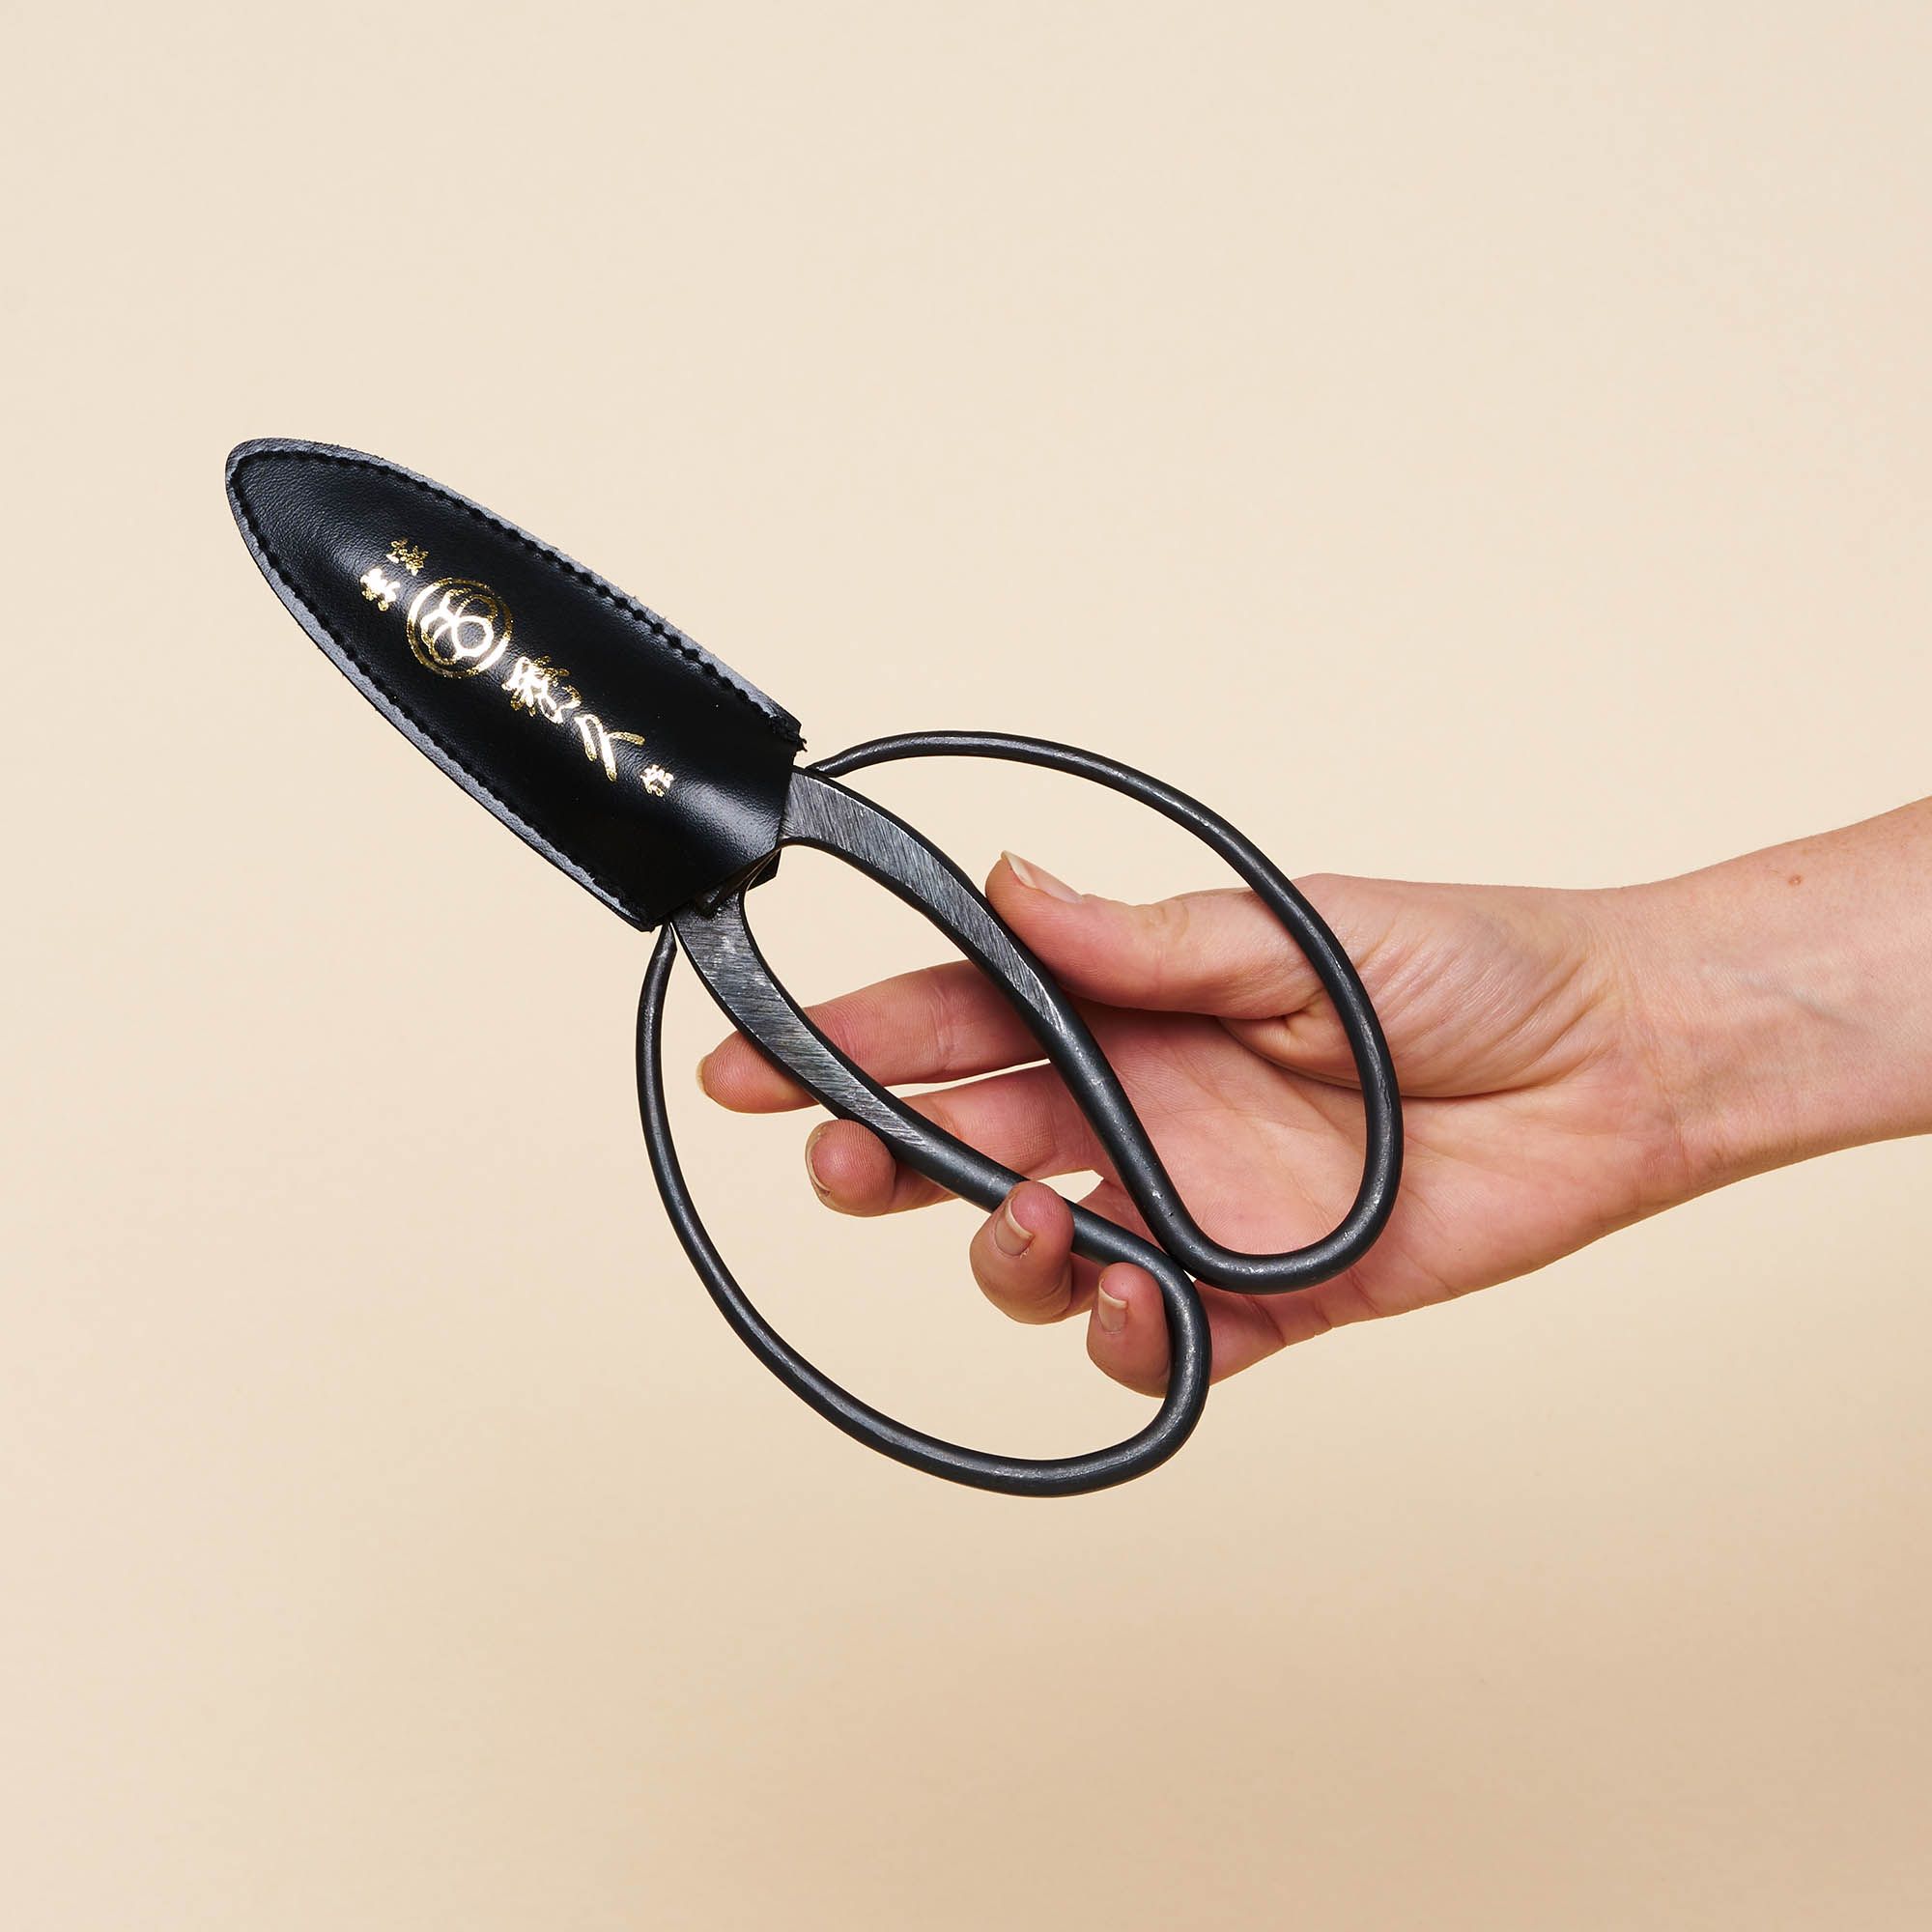 Japanese Gardening Shears, with a black balloon-shaped handle.